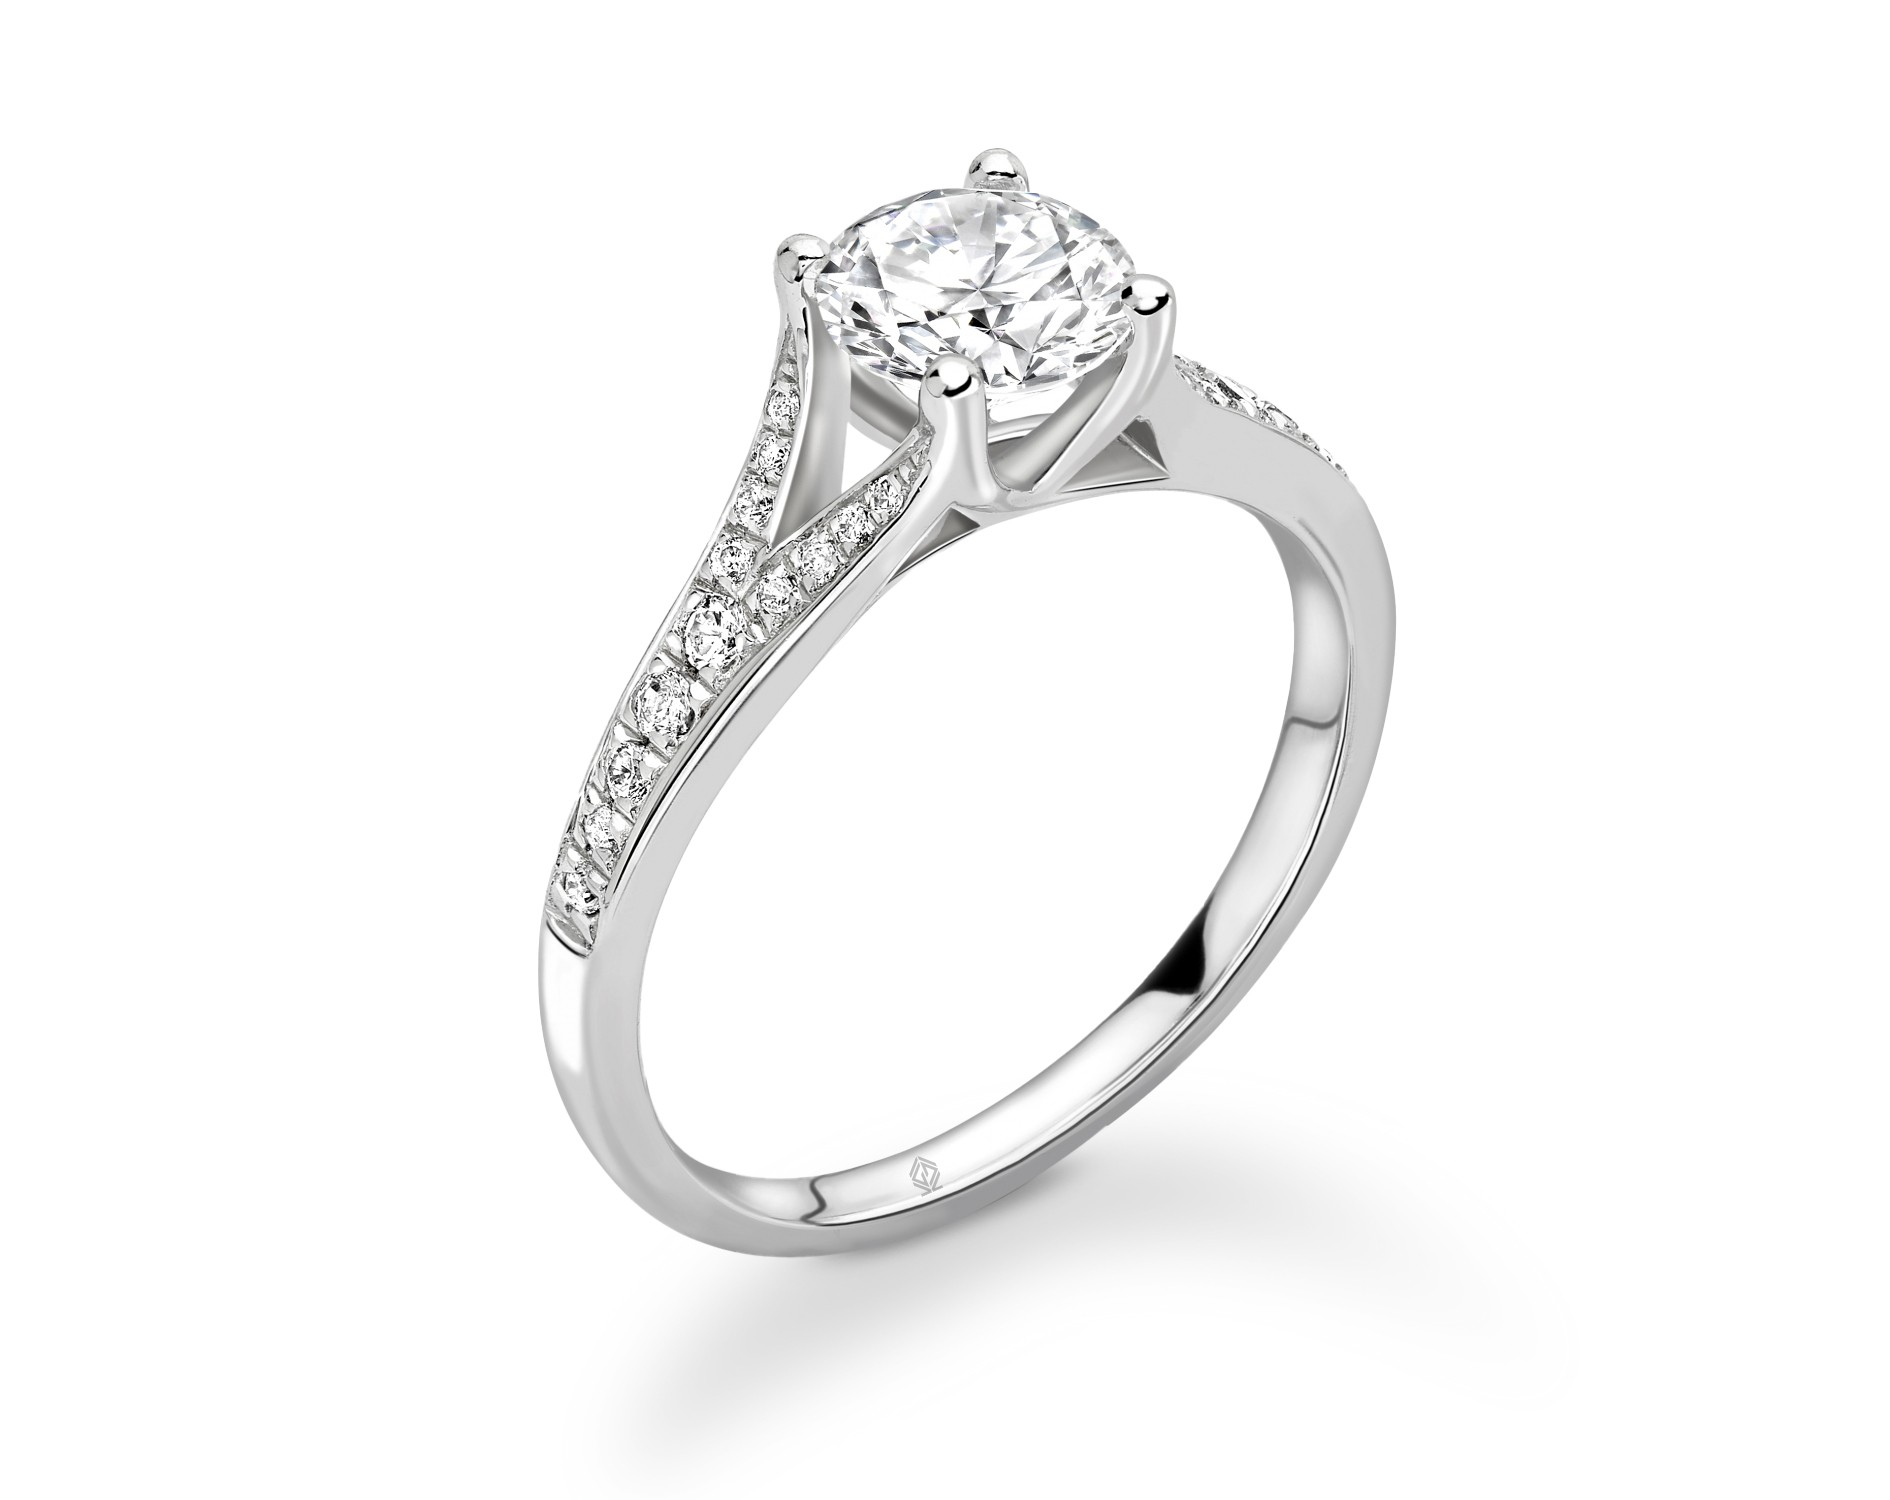 18K WHITE GOLD ROUND CUT 4 PRONGS DIAMOND ENGAGEMENT RING WITH SPLIT SHANK AND SIDE STONES